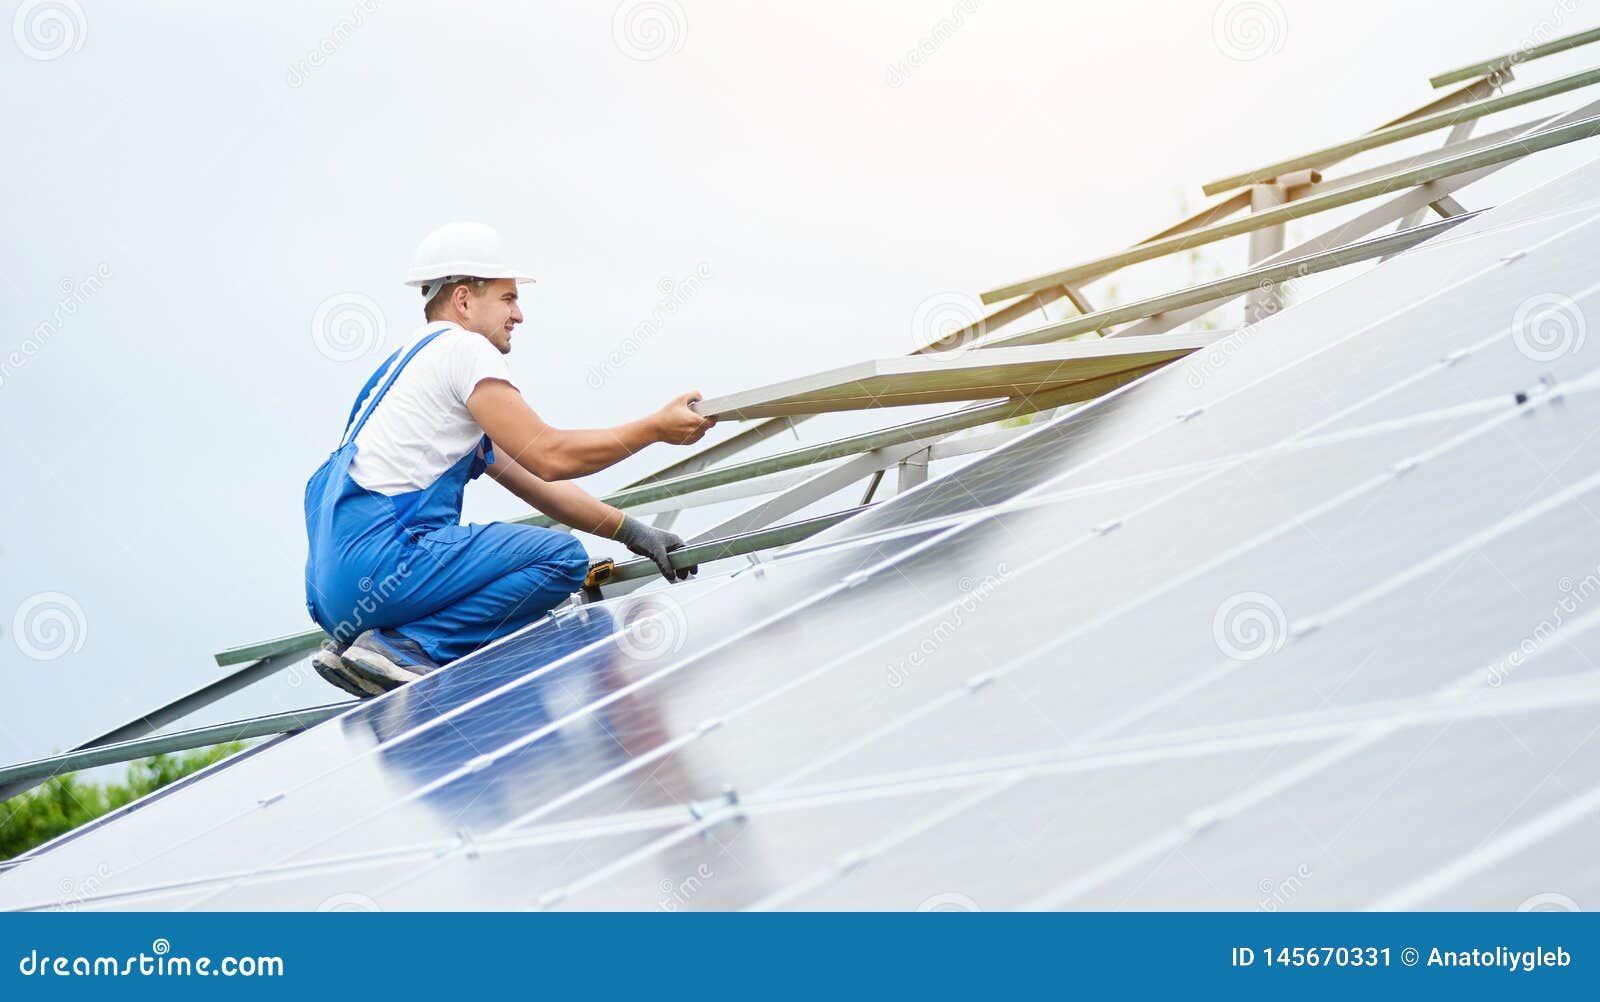 installing of solar photo voltaic panel system